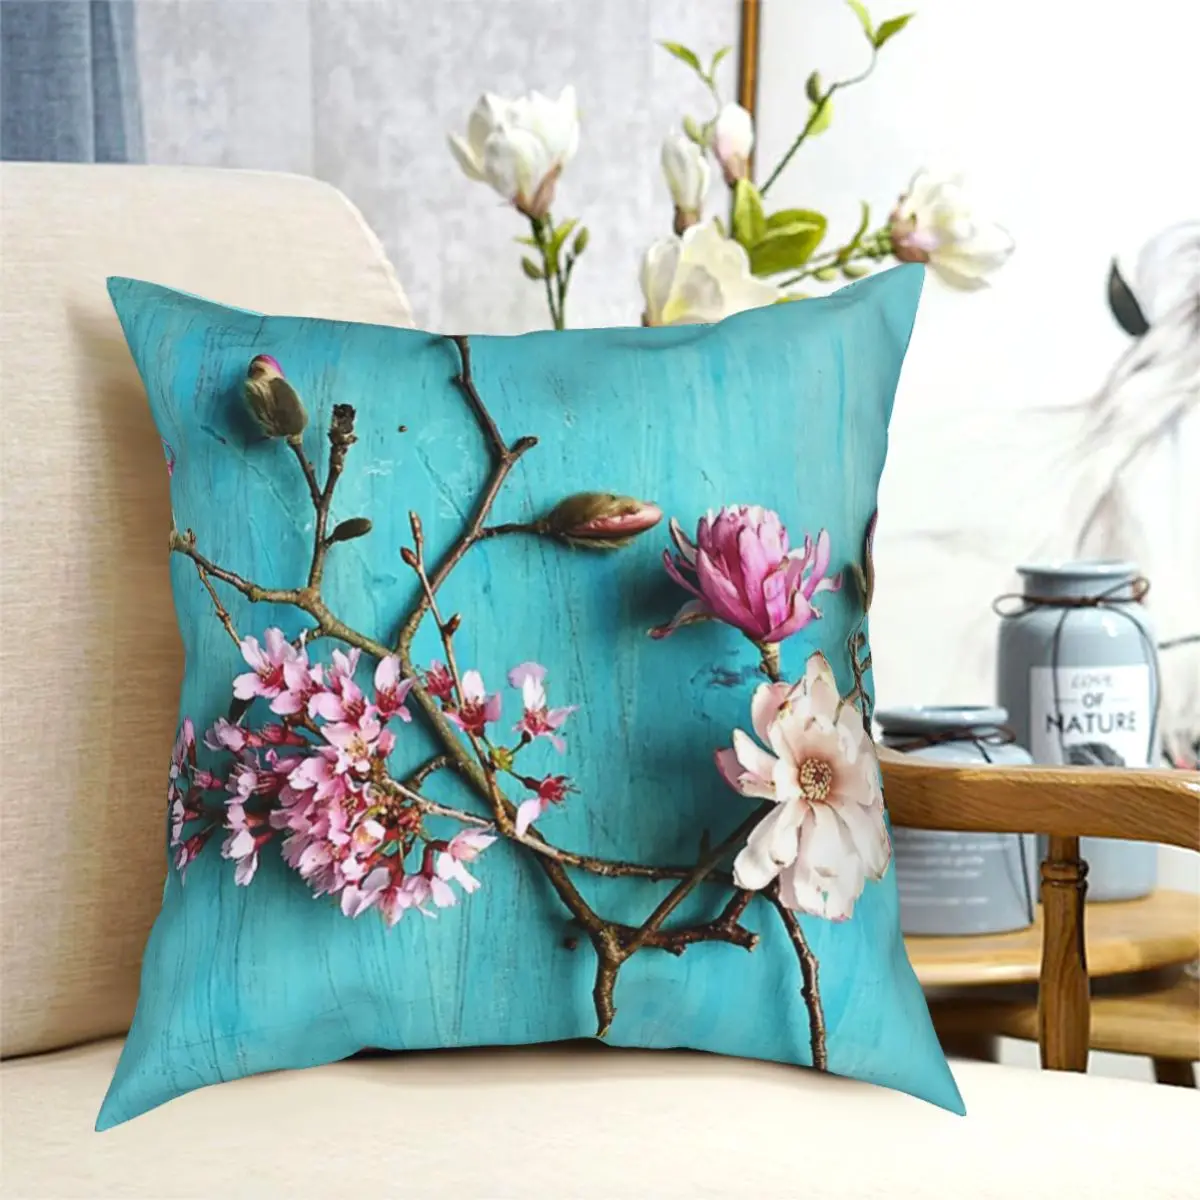 

Aqua Turquoise Flowers Of Spring Pillow Cushion Cover Decorative Pillowcases Case Home Sofa Cushions 40x40,45x45cm(Double Sides)